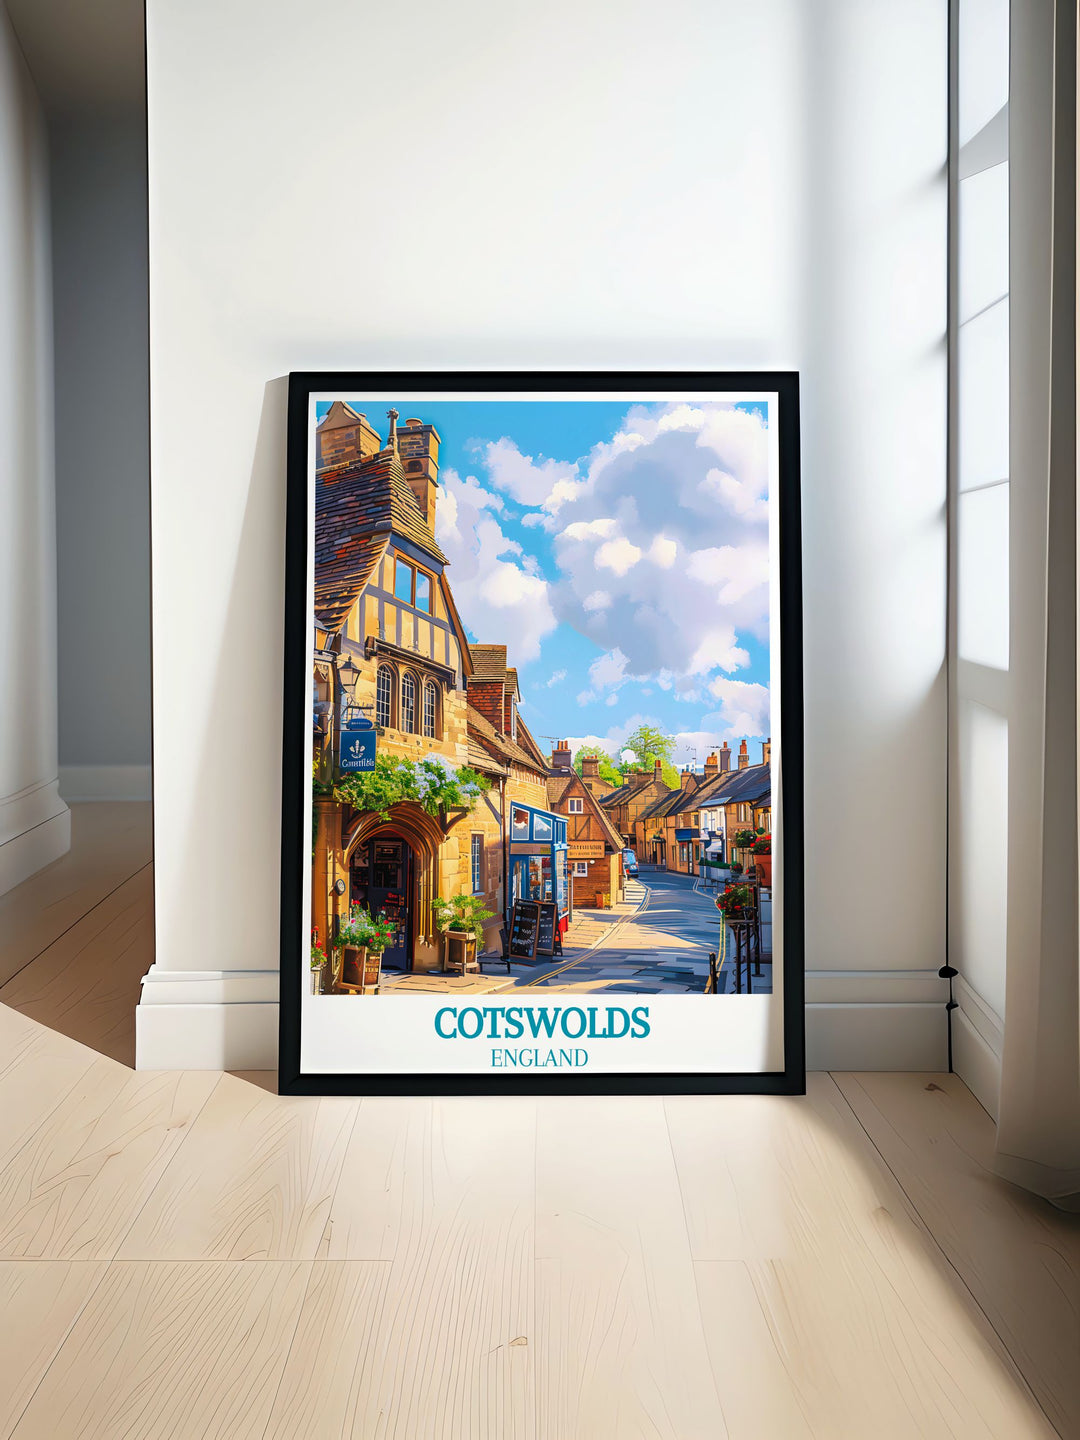 Explore the picturesque village of Chipping Campden with a travel poster that captures its historic streets and charming architecture, bringing the serene beauty of the Cotswolds into your home decor.